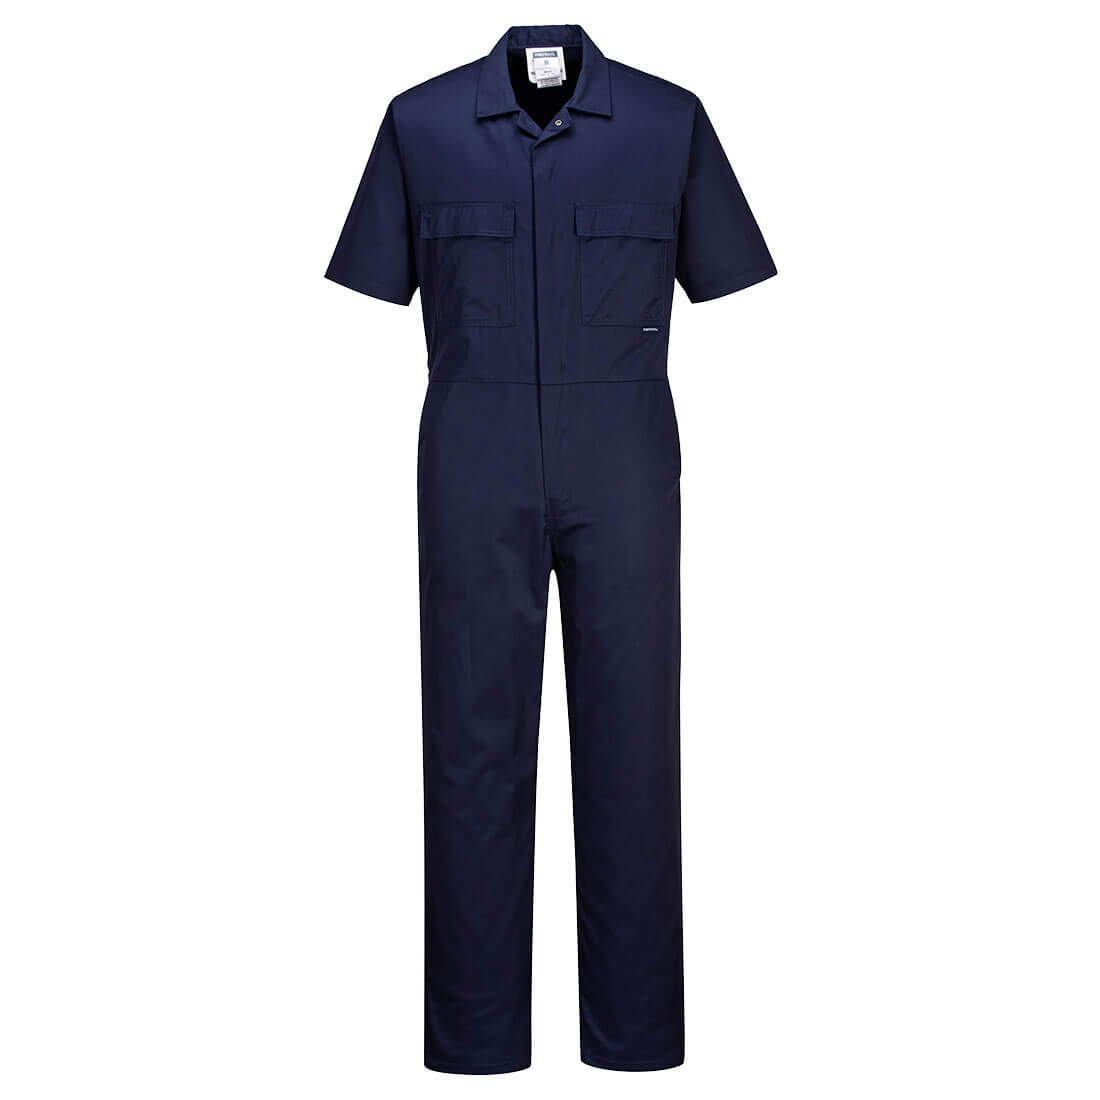 S996 Portwest® Short Sleeve Navy 65/35 Industrial Coveralls